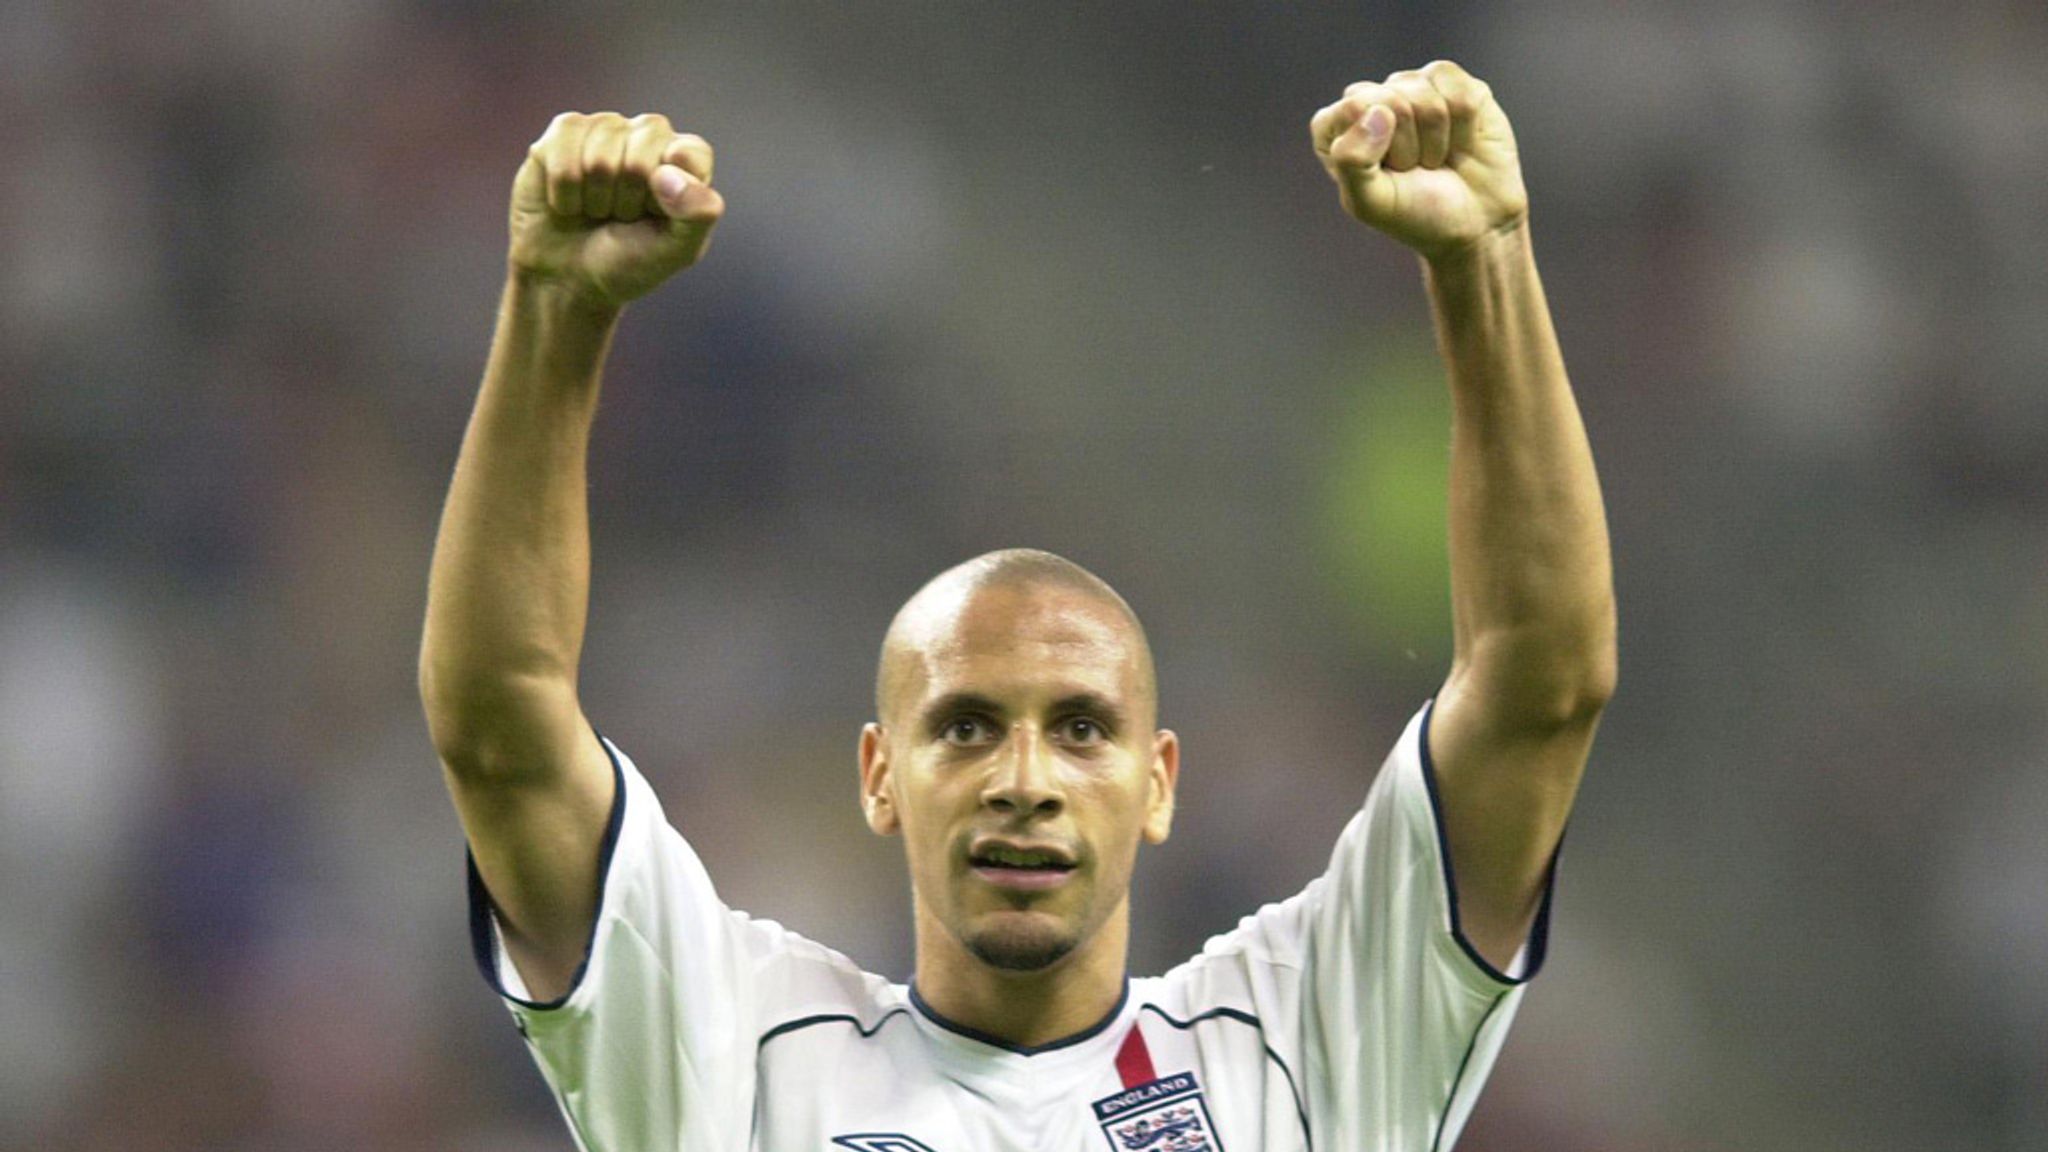 Rio Ferdinand Retires We Look At The Former England Captain S Career Highs And Lows Football News Sky Sports